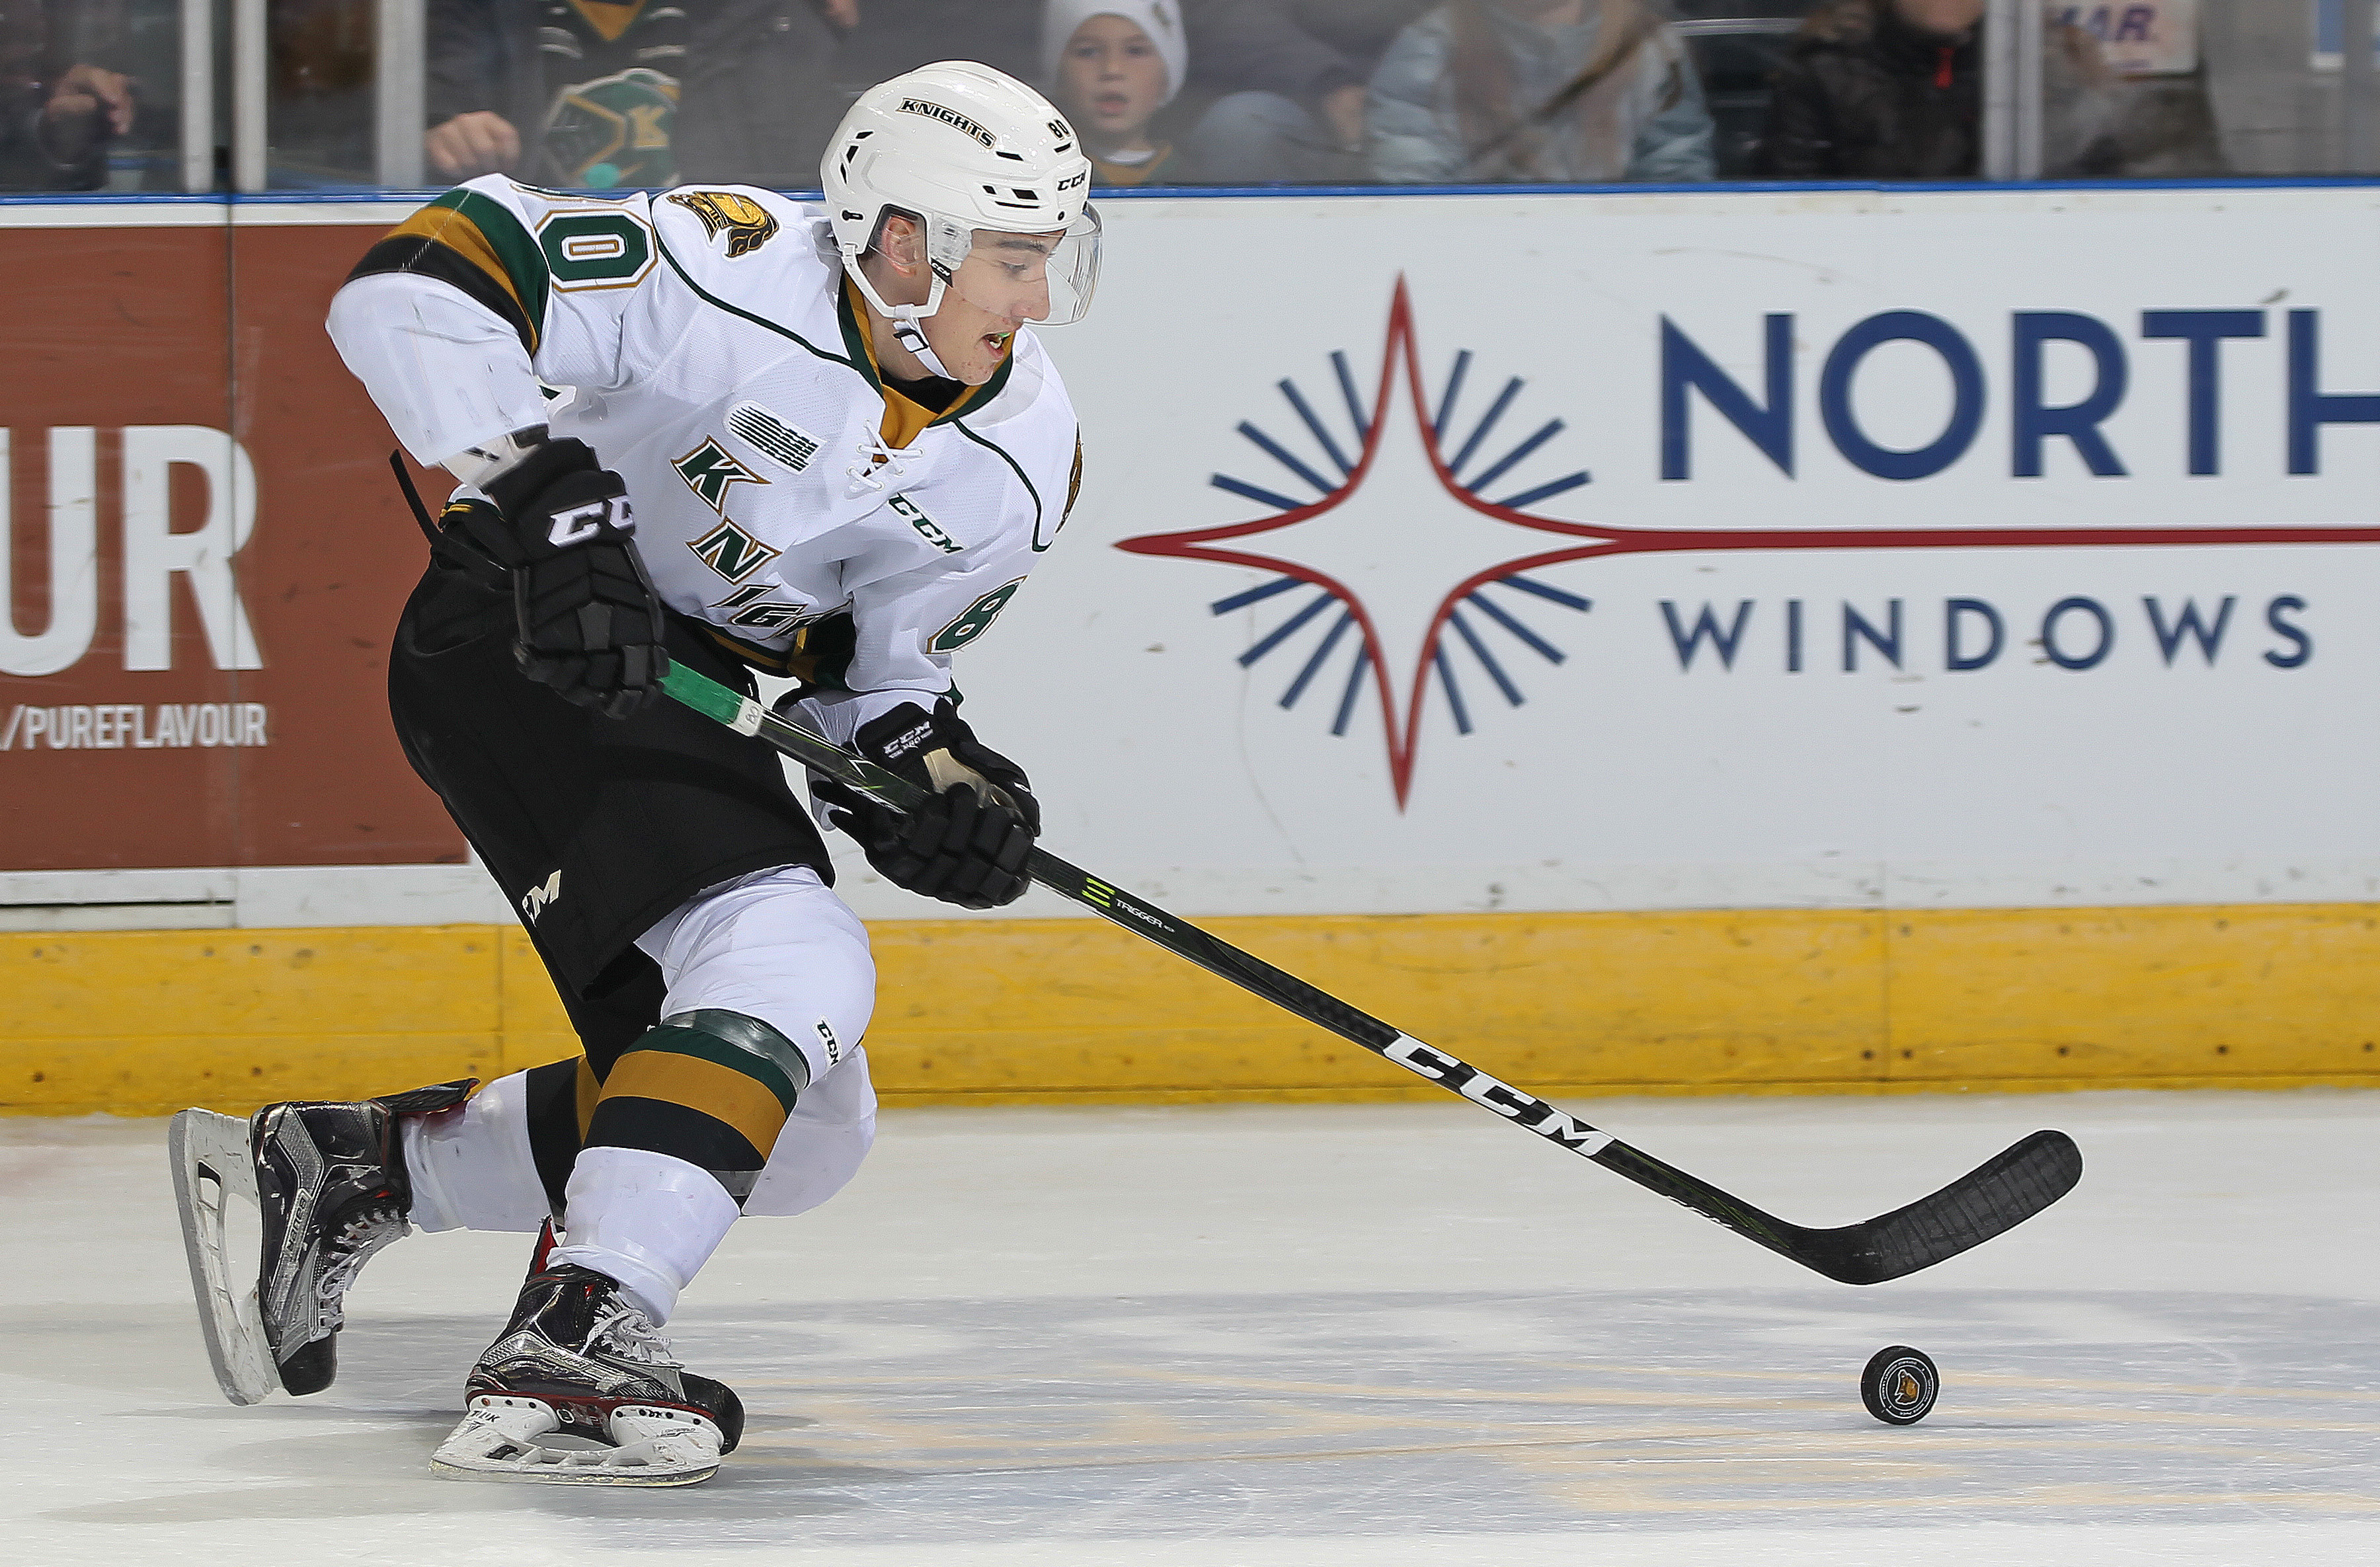 Kitchener's captain comes back to lead Rangers in Game 3 win over London  Knights